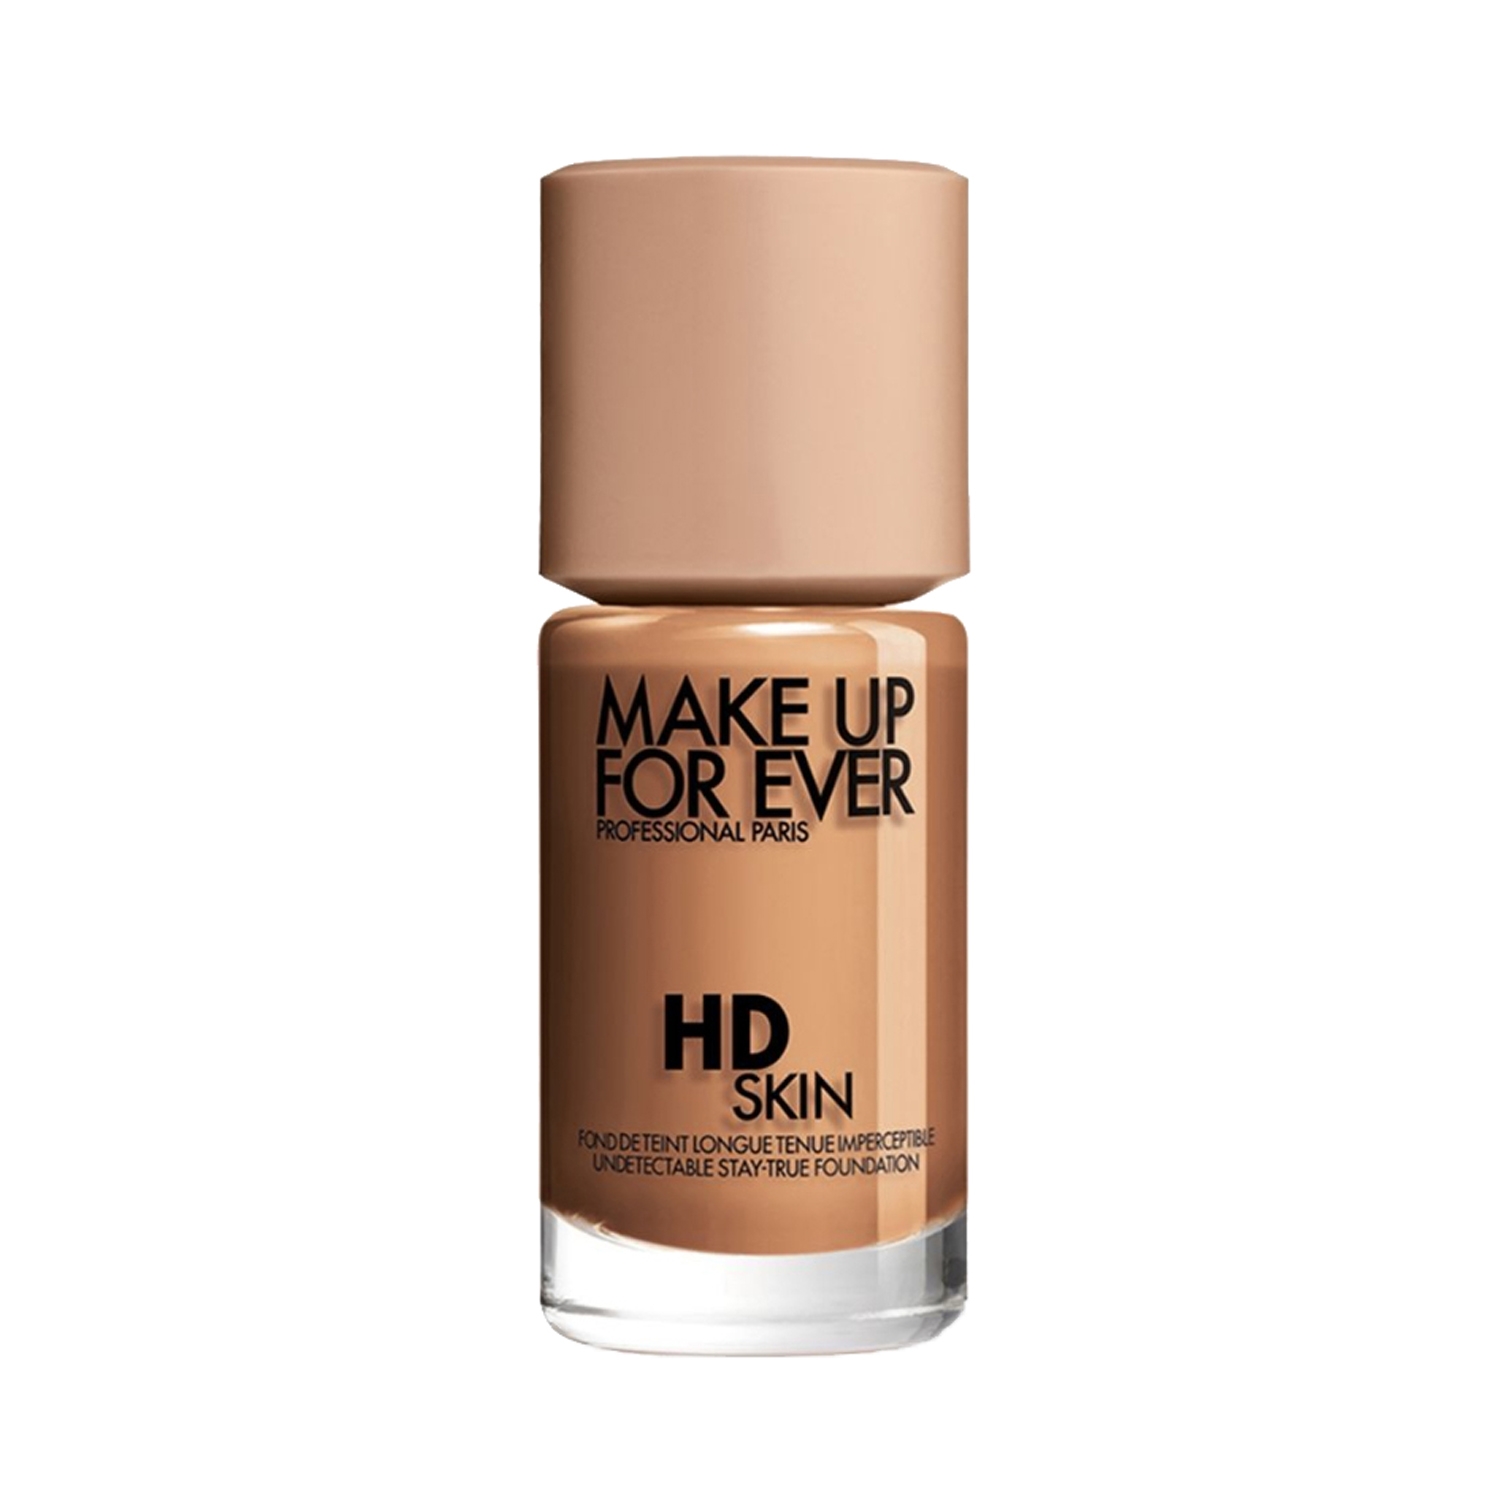 Make Up For Ever | Make Up For Ever Hd Skin Foundation-3N48 (Y422) (30ml)